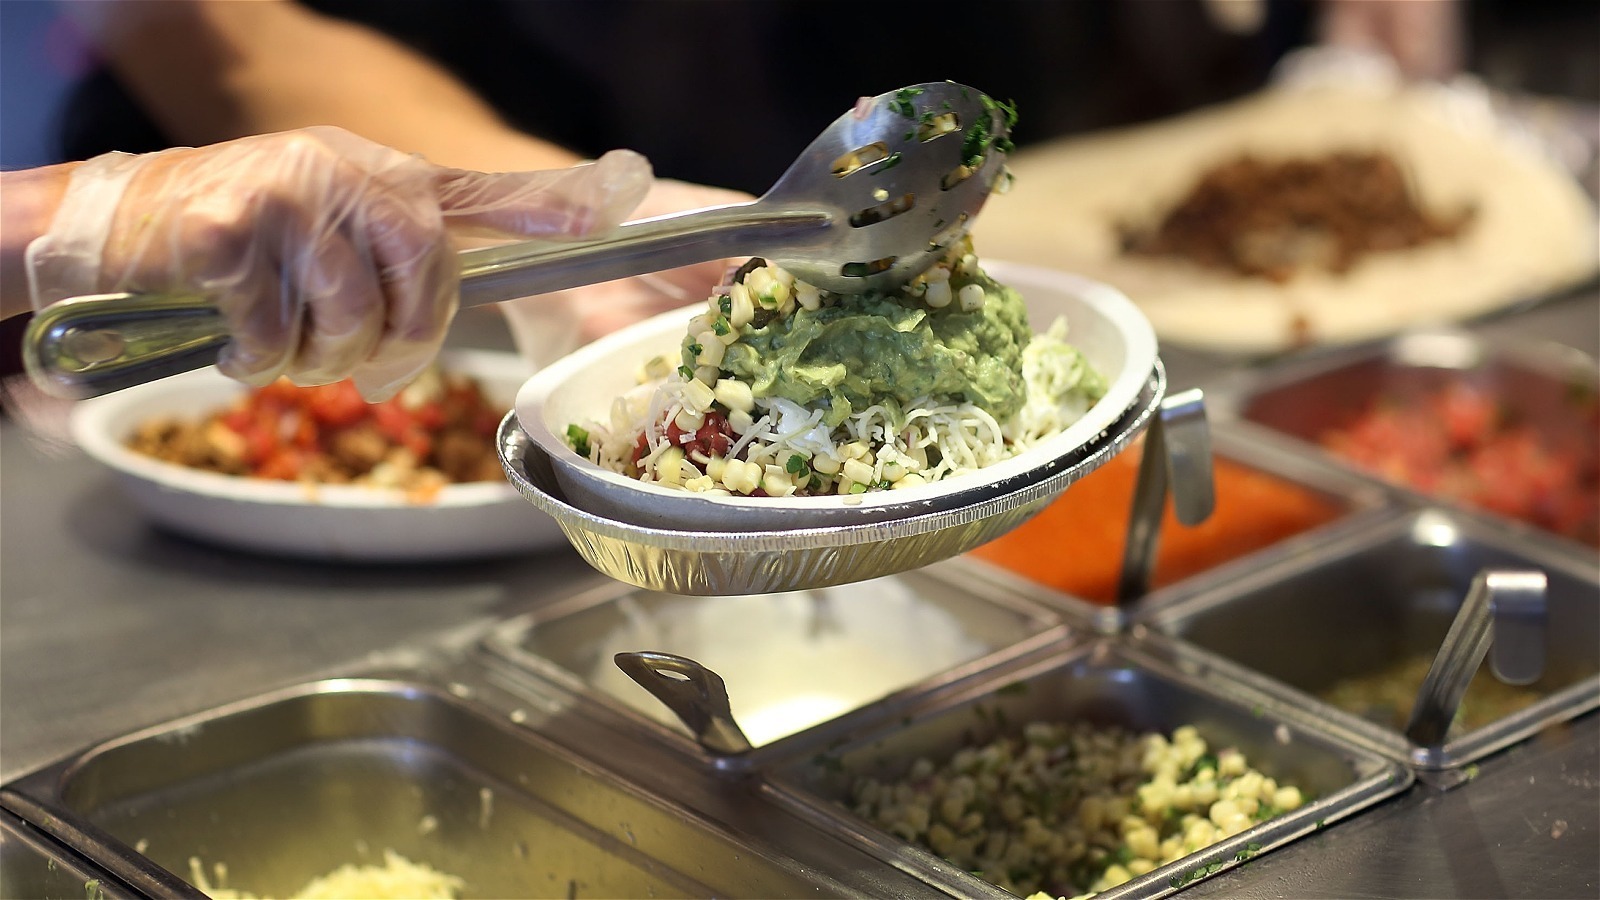 Chipotle Workers Can’t Stand When Customers Zig-Zag The Assembly Line – Mashed